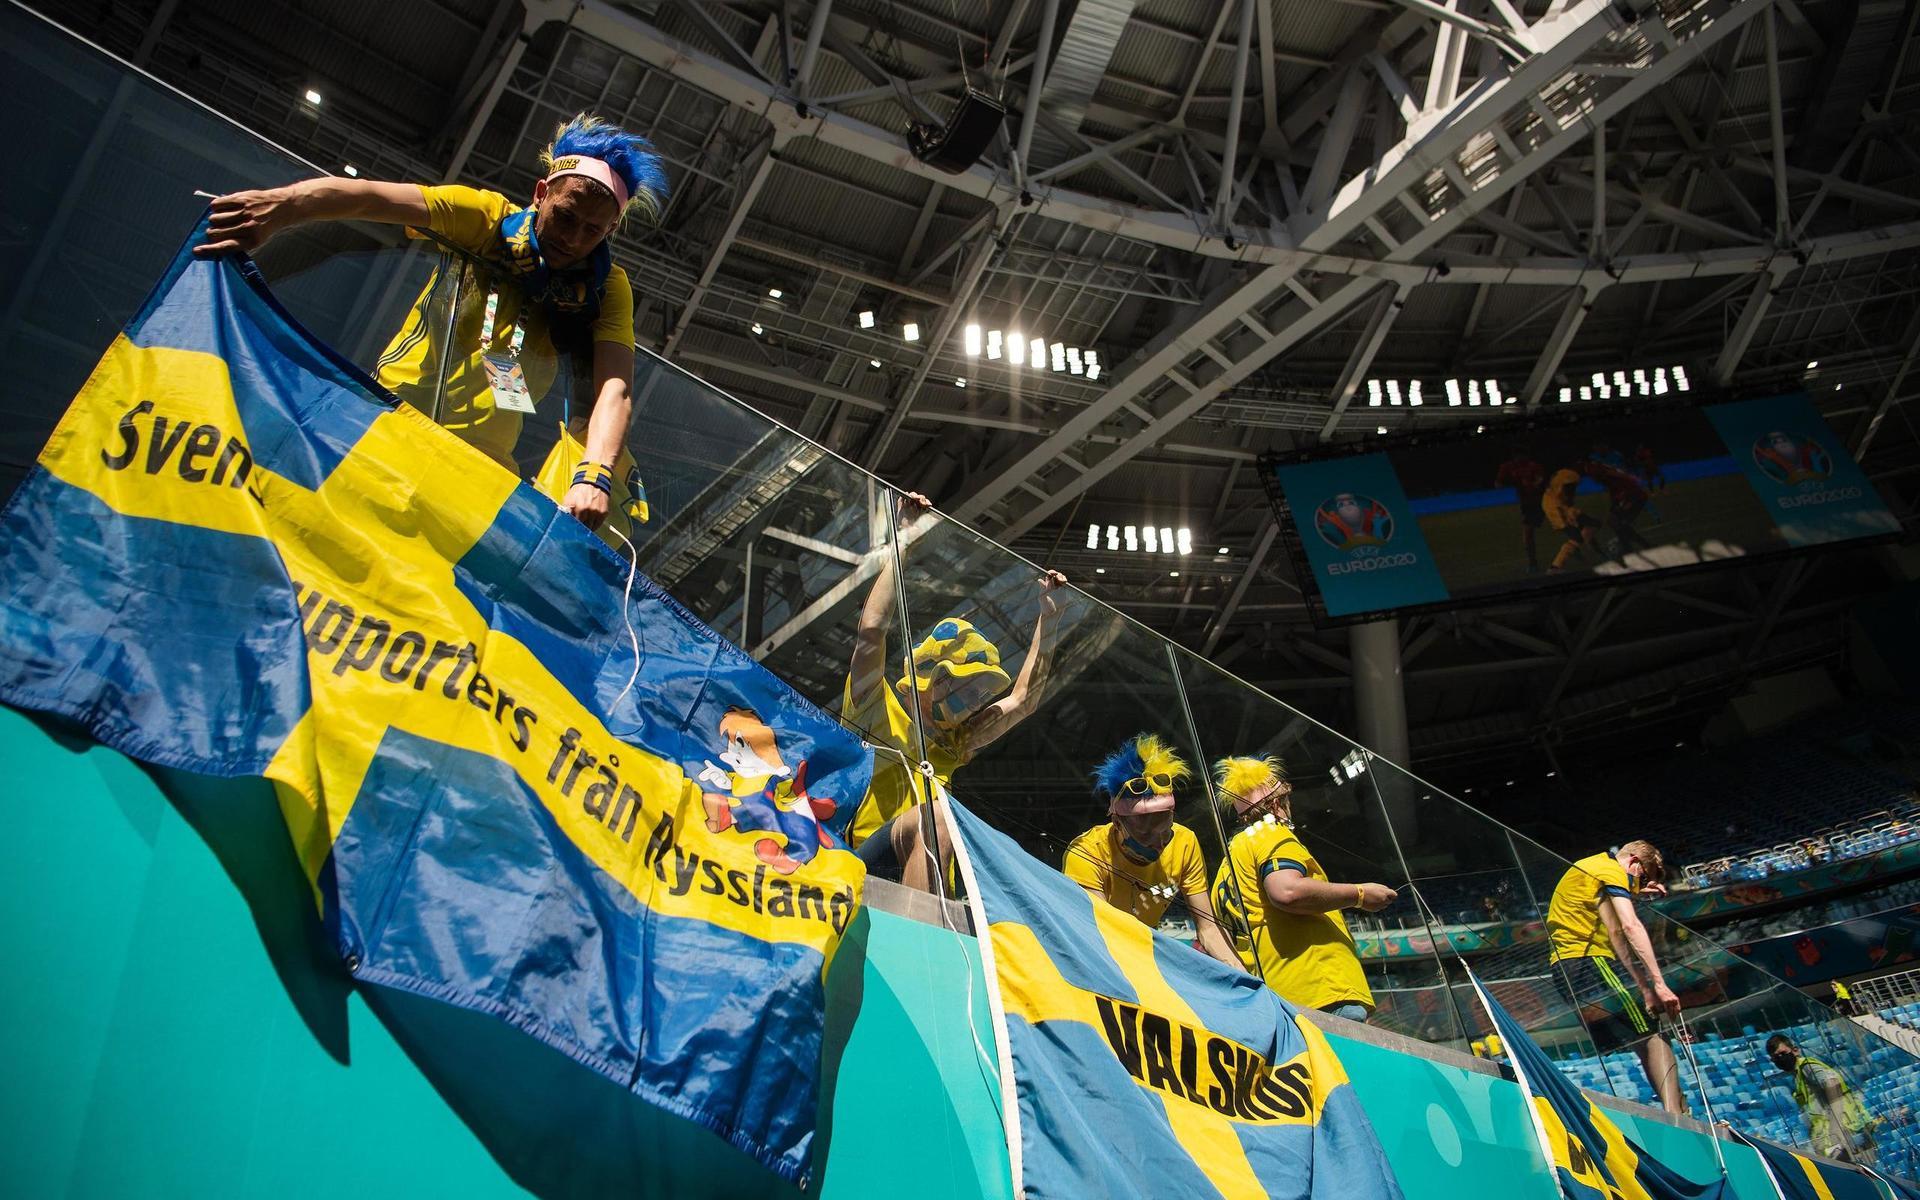 Swedish fans ahead of the UEFA Euro 2020 Football Championship match between Sweden and Slovakia on June 18, 2021 in Saint Petersburg. 